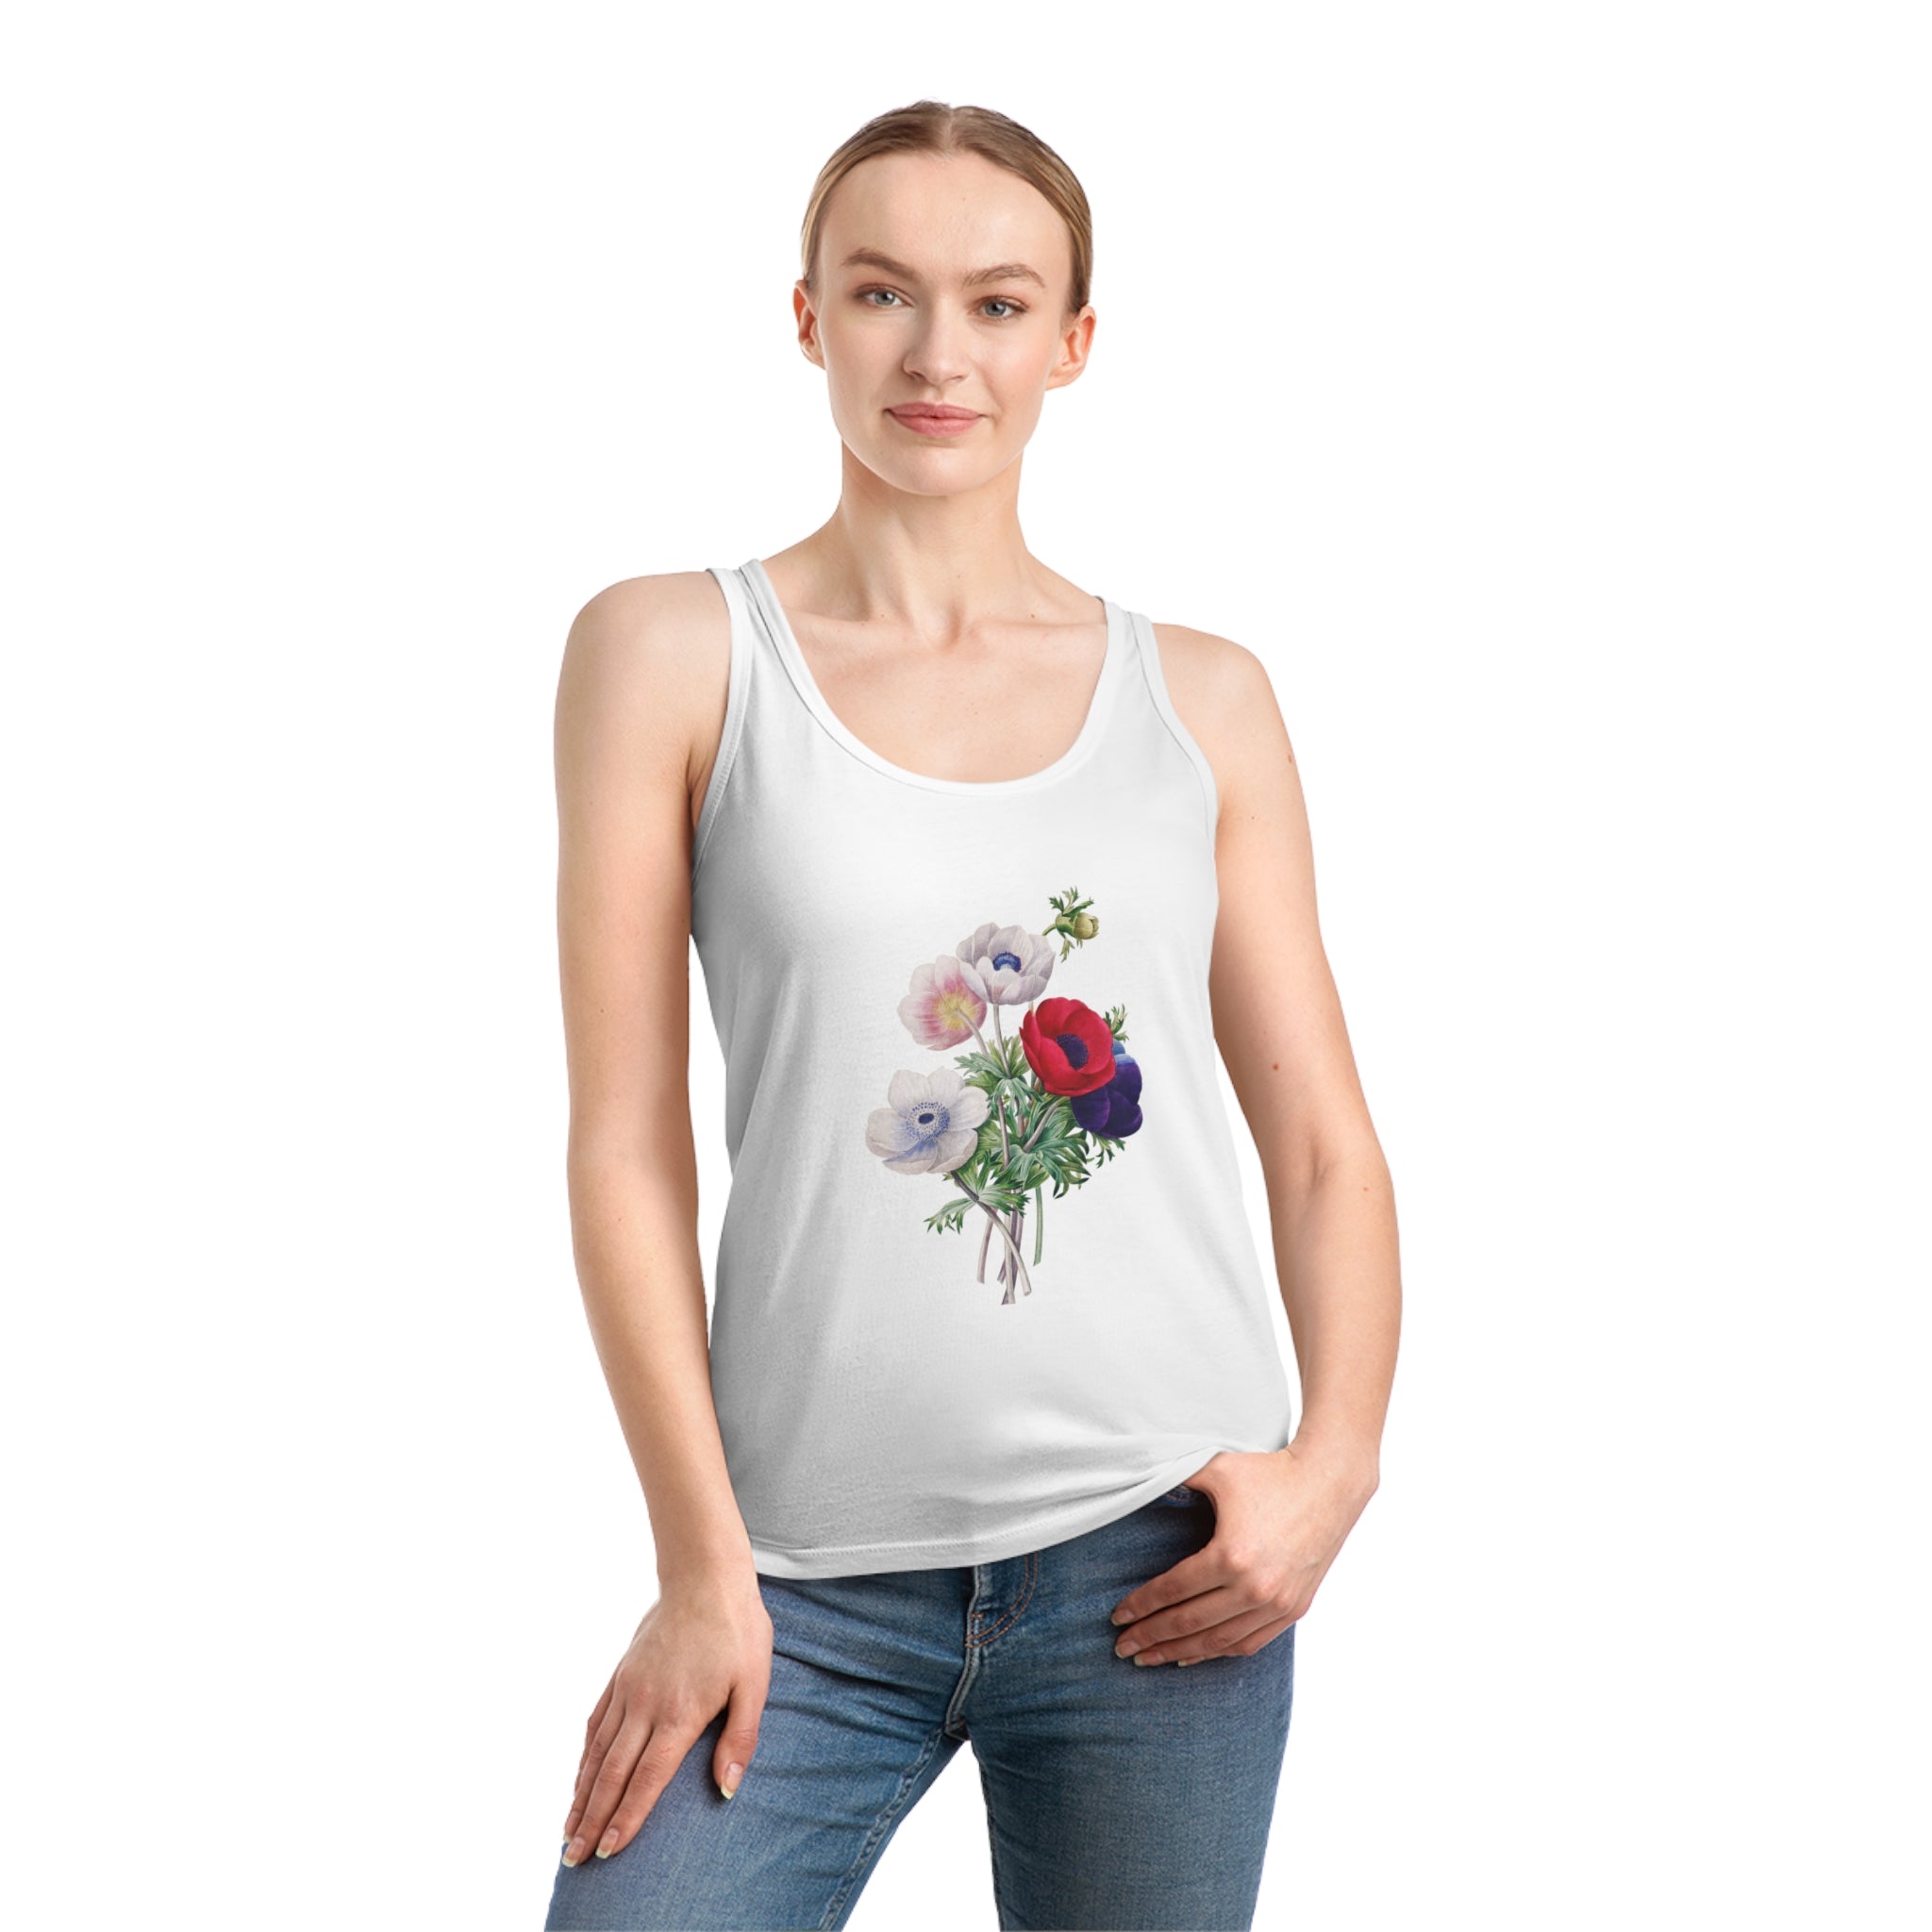 An Anemones Tank Top with flowers on it.